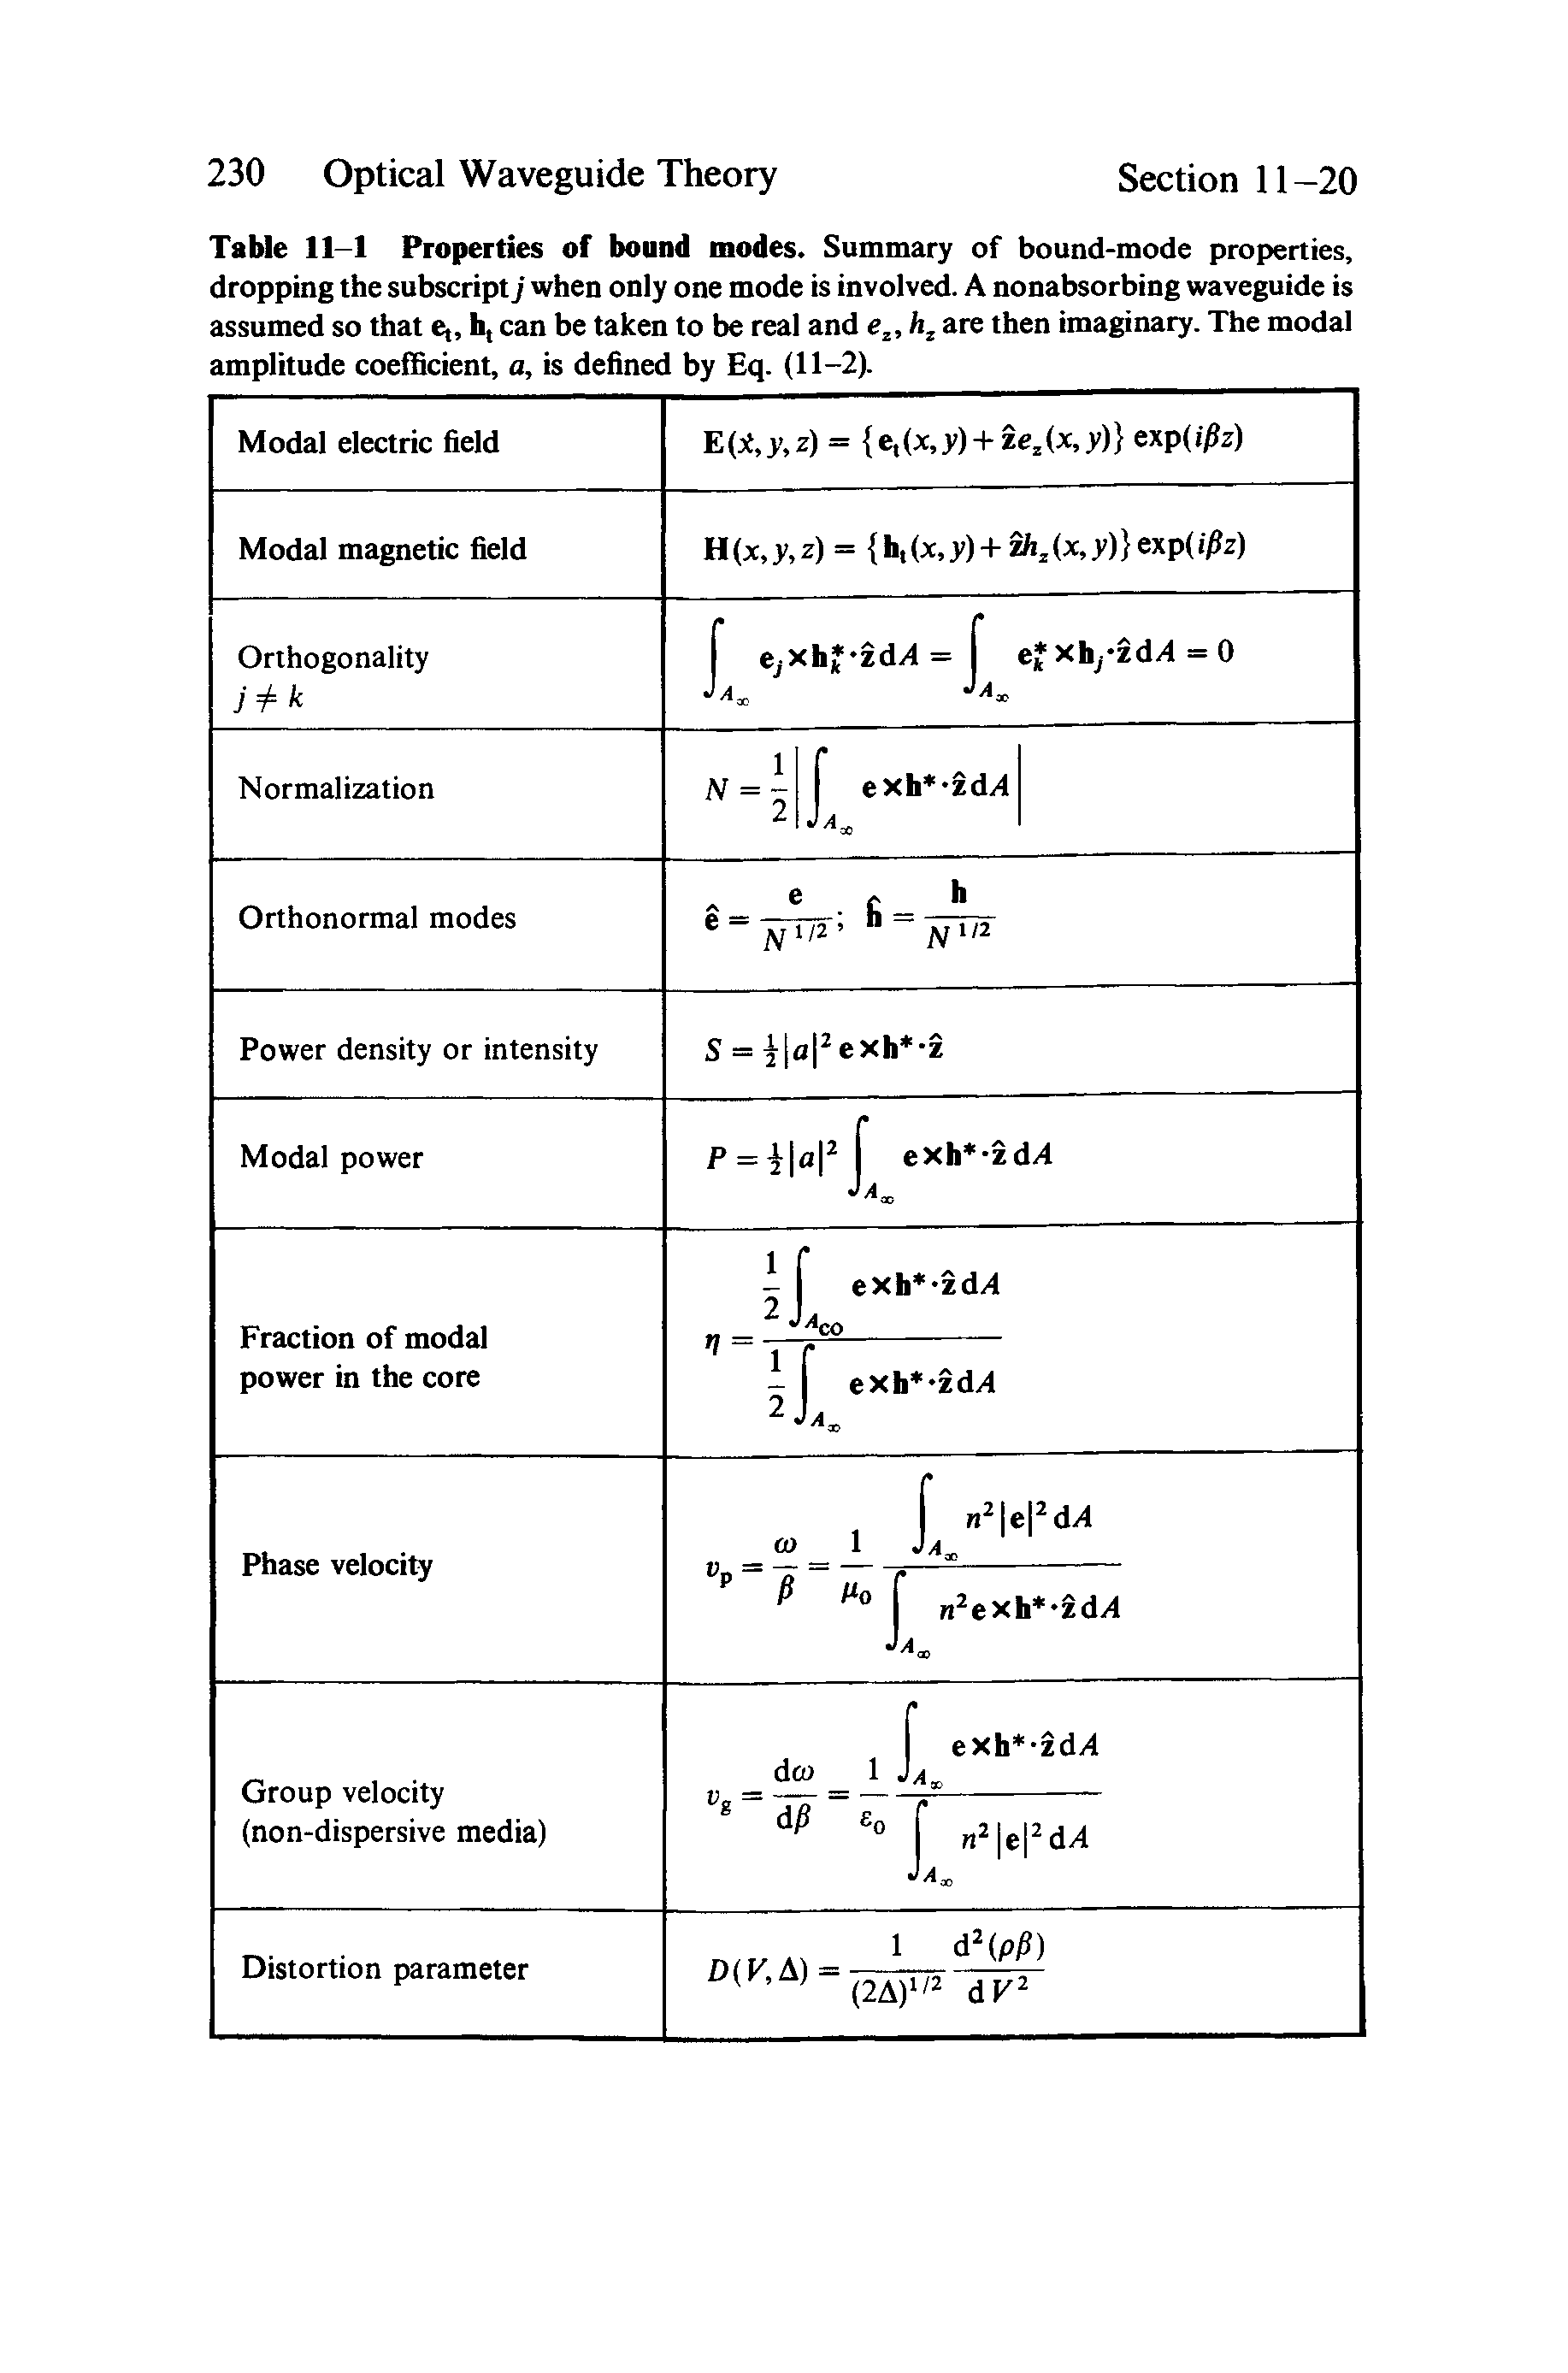 Table 11-1 Properties of bound modes. Summary of bound-mode properties, dropping the subscript j when only one mode is involved. A nonabsorbing waveguide is assumed so that e, h, can be taken to be real and e, are then imaginary. The modal amplitude coefficient, a, is defined by Eq. (11-2).